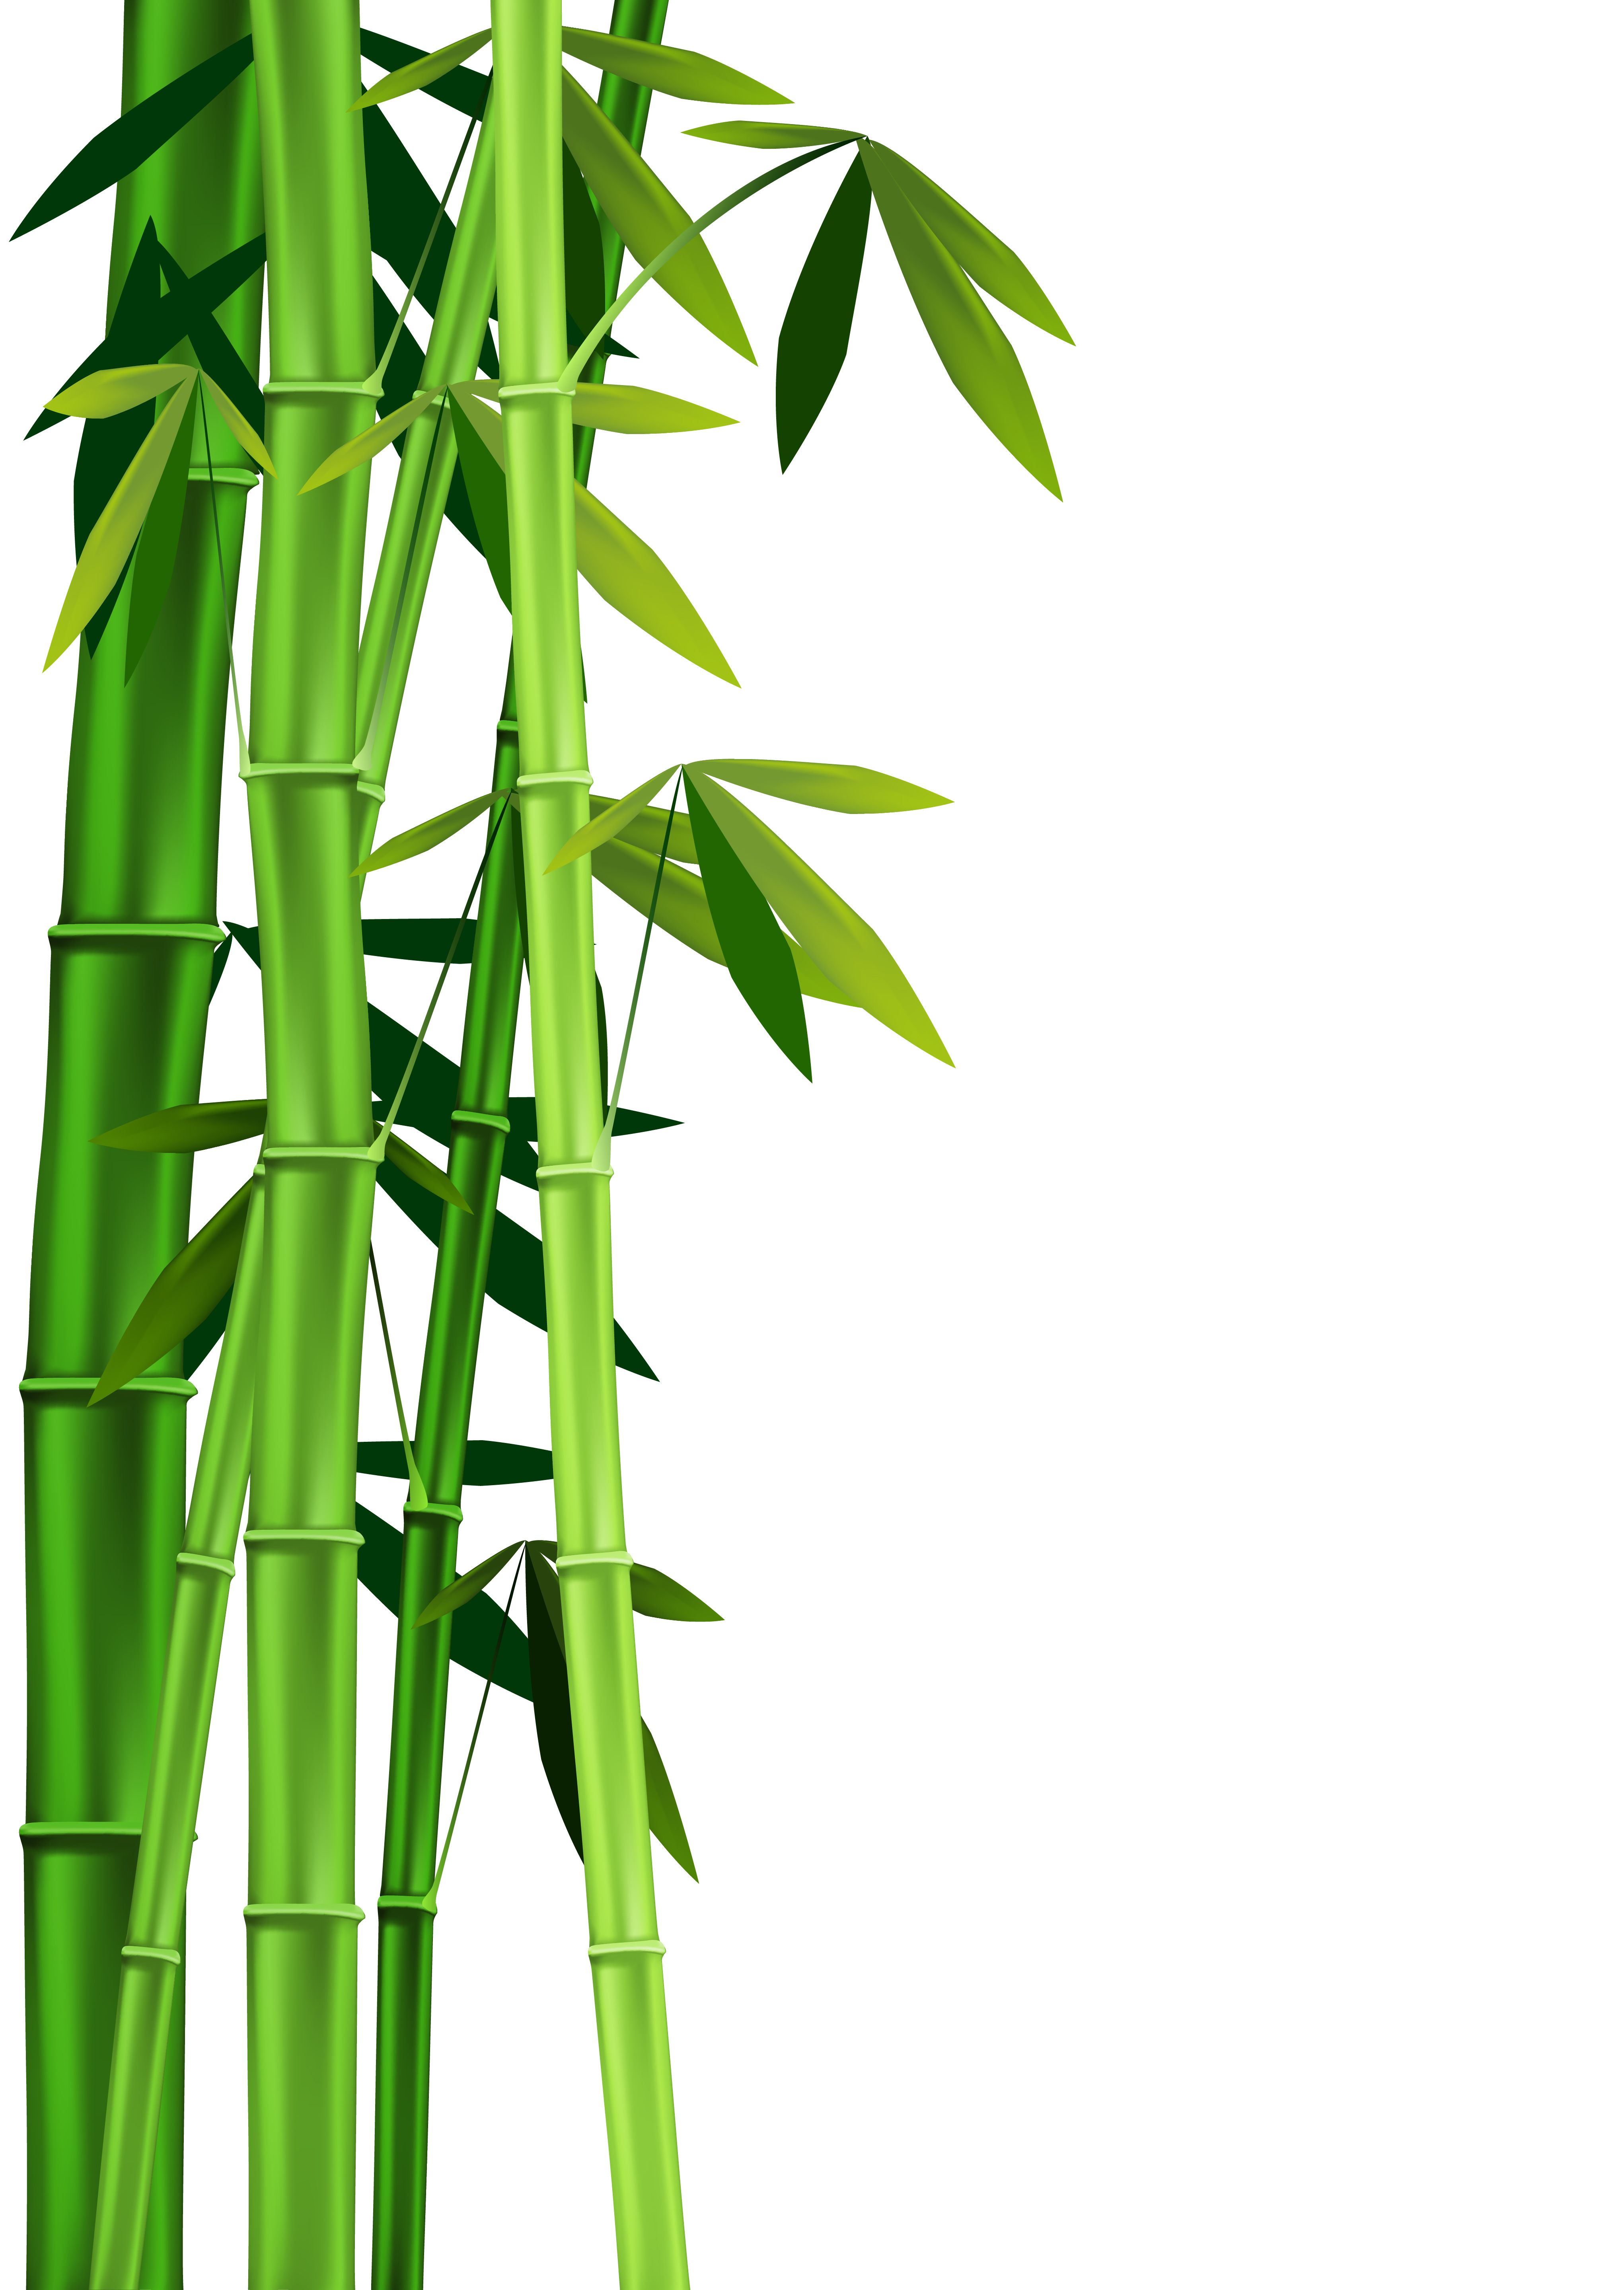 images of bamboo - Google Search | panda ideas | Pinterest